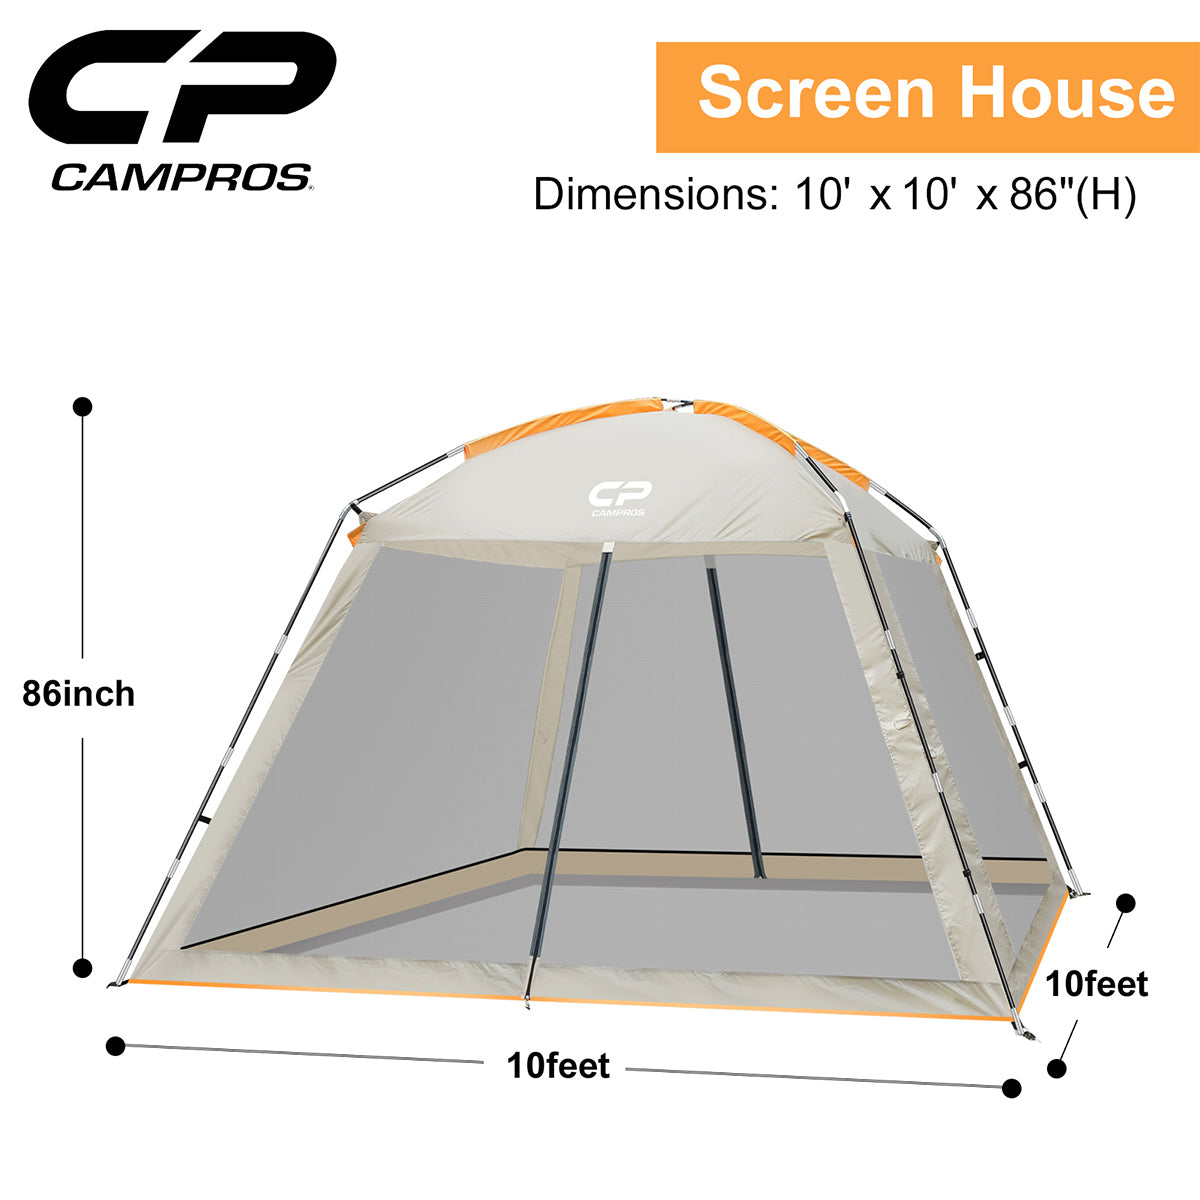 CAMPROS Screen House 10 x 10 Ft Canopy Tent-Canopy Tents-Campros Tent